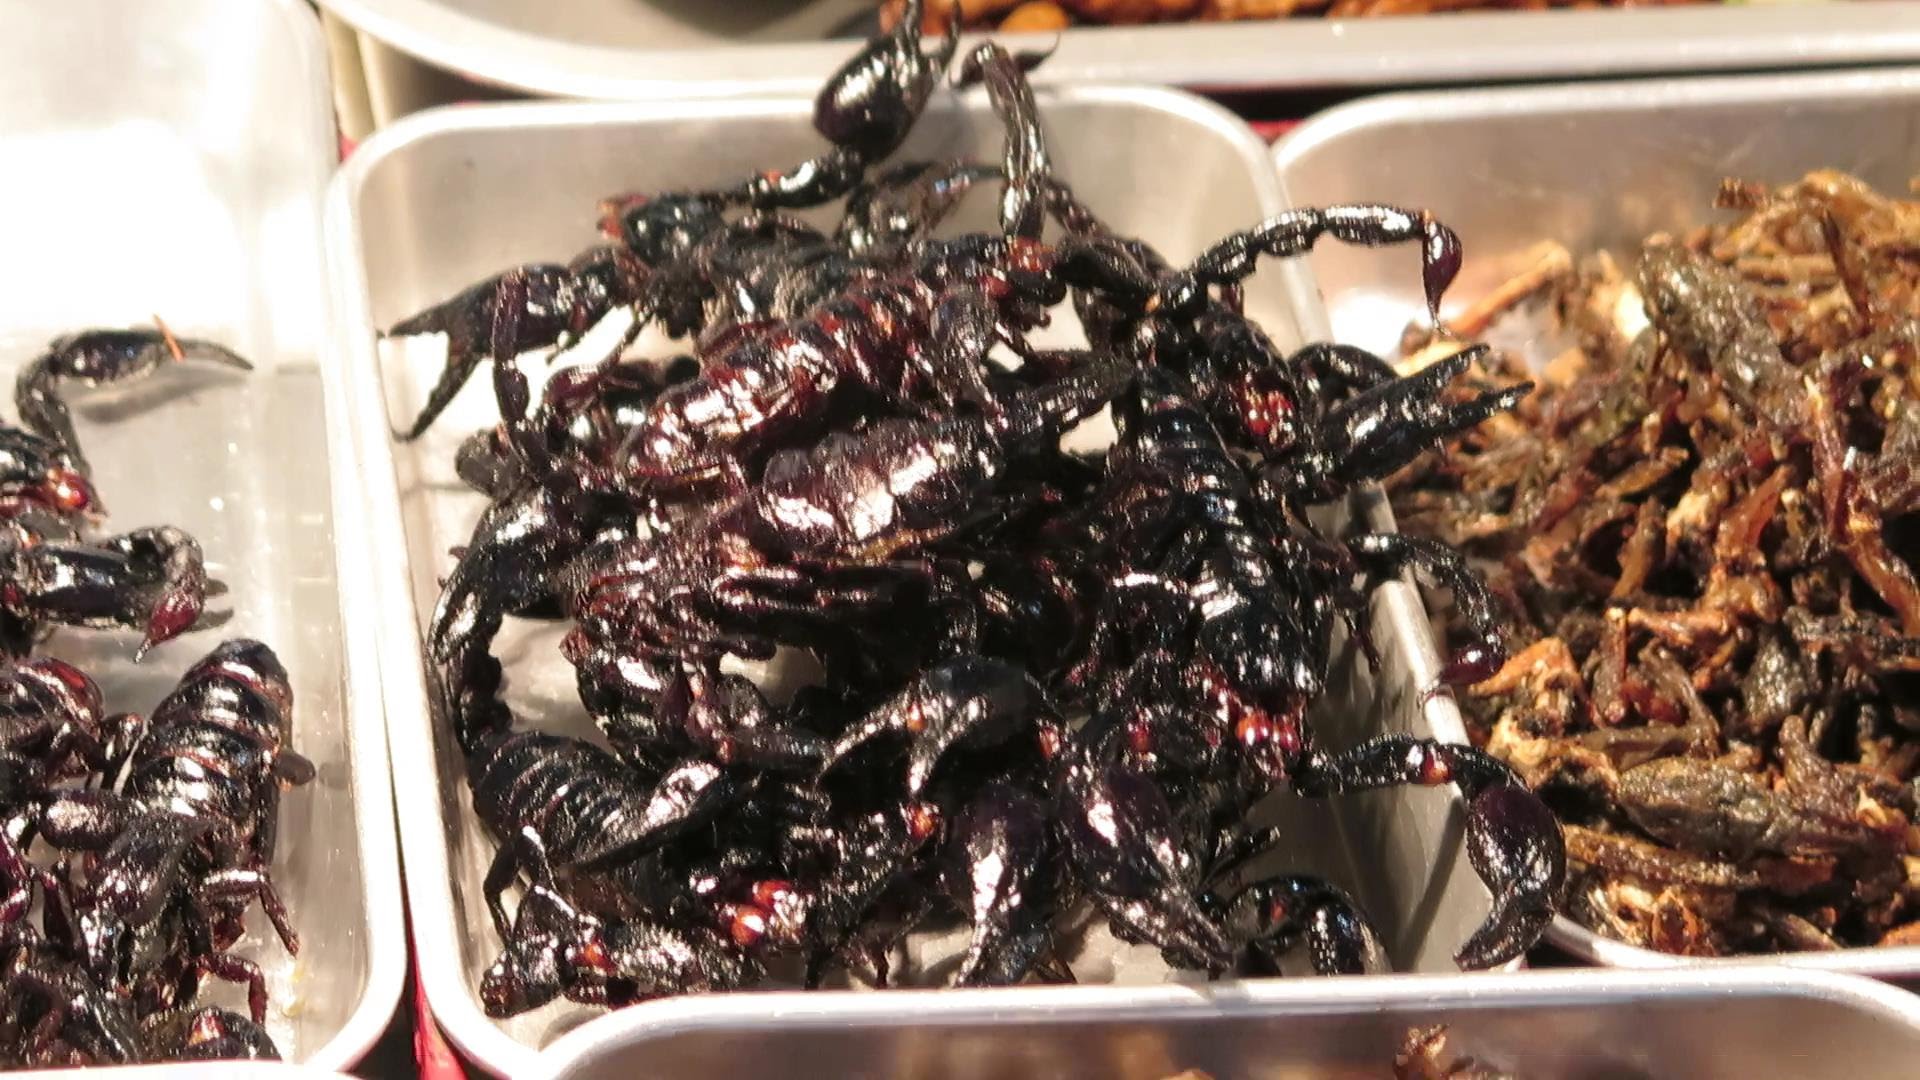 Eating Scorpions and Cockroaches. Bangkok Street Food, Thailand ...